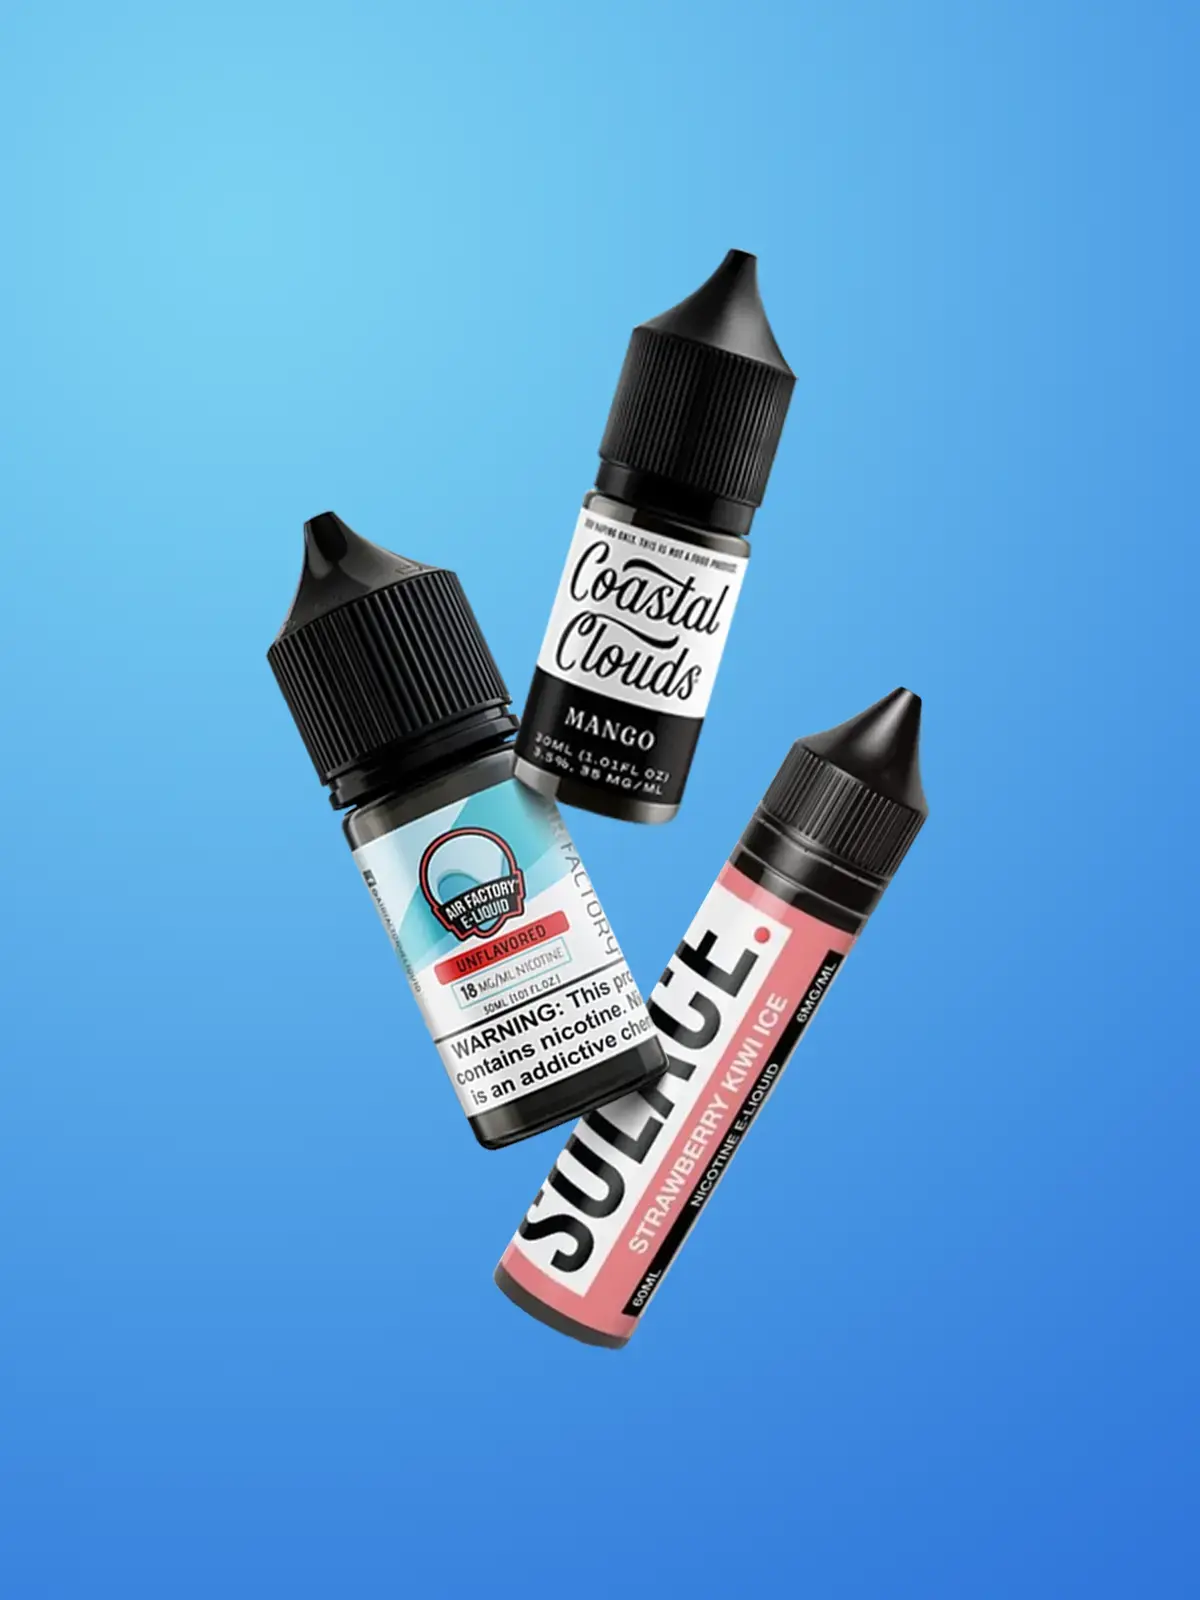 Three bottles of vape juice; unflavoured Air Factory, Coastal Clouds Mango and Solace Strawberry Kiwi Ice floating in front of a blue background